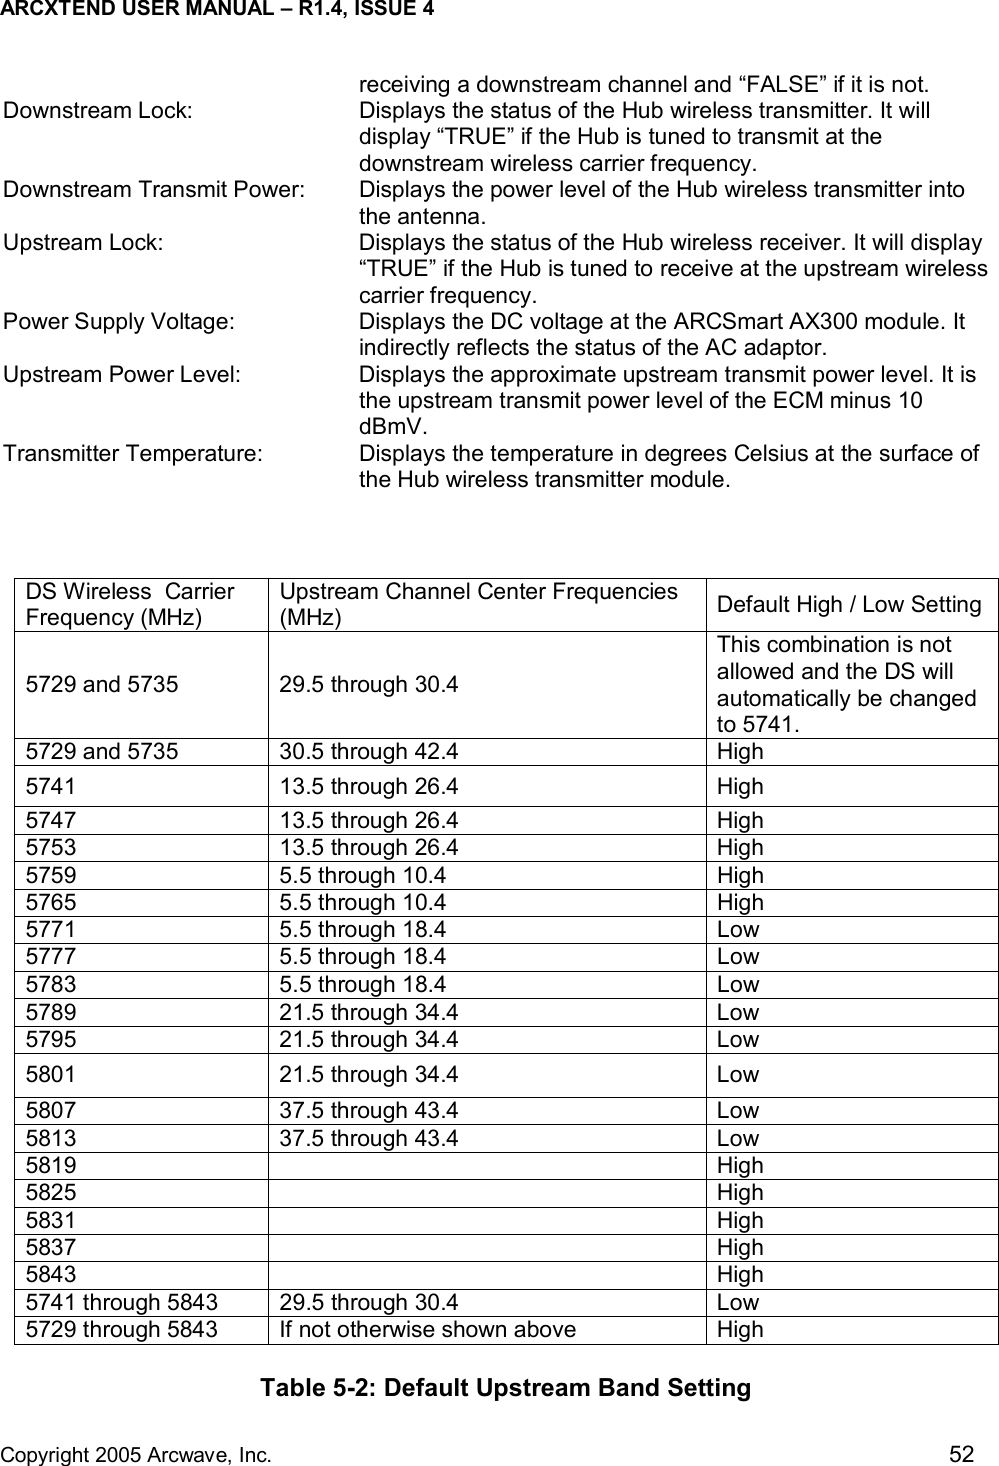 ARCXTEND USER MANUAL – R1.4, ISSUE 4  Copyright 2005 Arcwave, Inc.    52 receiving a downstream channel and “FALSE” if it is not.  Downstream Lock:  Displays the status of the Hub wireless transmitter. It will display “TRUE” if the Hub is tuned to transmit at the downstream wireless carrier frequency.  Downstream Transmit Power:  Displays the power level of the Hub wireless transmitter into the antenna.  Upstream Lock:  Displays the status of the Hub wireless receiver. It will display “TRUE” if the Hub is tuned to receive at the upstream wireless carrier frequency. Power Supply Voltage:  Displays the DC voltage at the ARCSmart AX300 module. It indirectly reflects the status of the AC adaptor.  Upstream Power Level:  Displays the approximate upstream transmit power level. It is the upstream transmit power level of the ECM minus 10 dBmV. Transmitter Temperature:  Displays the temperature in degrees Celsius at the surface of the Hub wireless transmitter module.   DS Wireless  Carrier Frequency (MHz) Upstream Channel Center Frequencies (MHz)  Default High / Low Setting 5729 and 5735  29.5 through 30.4 This combination is not allowed and the DS will automatically be changed to 5741. 5729 and 5735  30.5 through 42.4  High 5741  13.5 through 26.4  High 5747  13.5 through 26.4  High 5753  13.5 through 26.4  High 5759 5.5 through 10.4  High 5765 5.5 through 10.4  High 5771 5.5 through 18.4  Low 5777 5.5 through 18.4  Low 5783 5.5 through 18.4  Low 5789  21.5 through 34.4  Low 5795  21.5 through 34.4  Low 5801  21.5 through 34.4  Low 5807  37.5 through 43.4  Low 5813  37.5 through 43.4  Low 5819   High 5825   High 5831   High 5837   High 5843   High 5741 through 5843  29.5 through 30.4  Low 5729 through 5843  If not otherwise shown above  High Table 5-2: Default Upstream Band Setting 